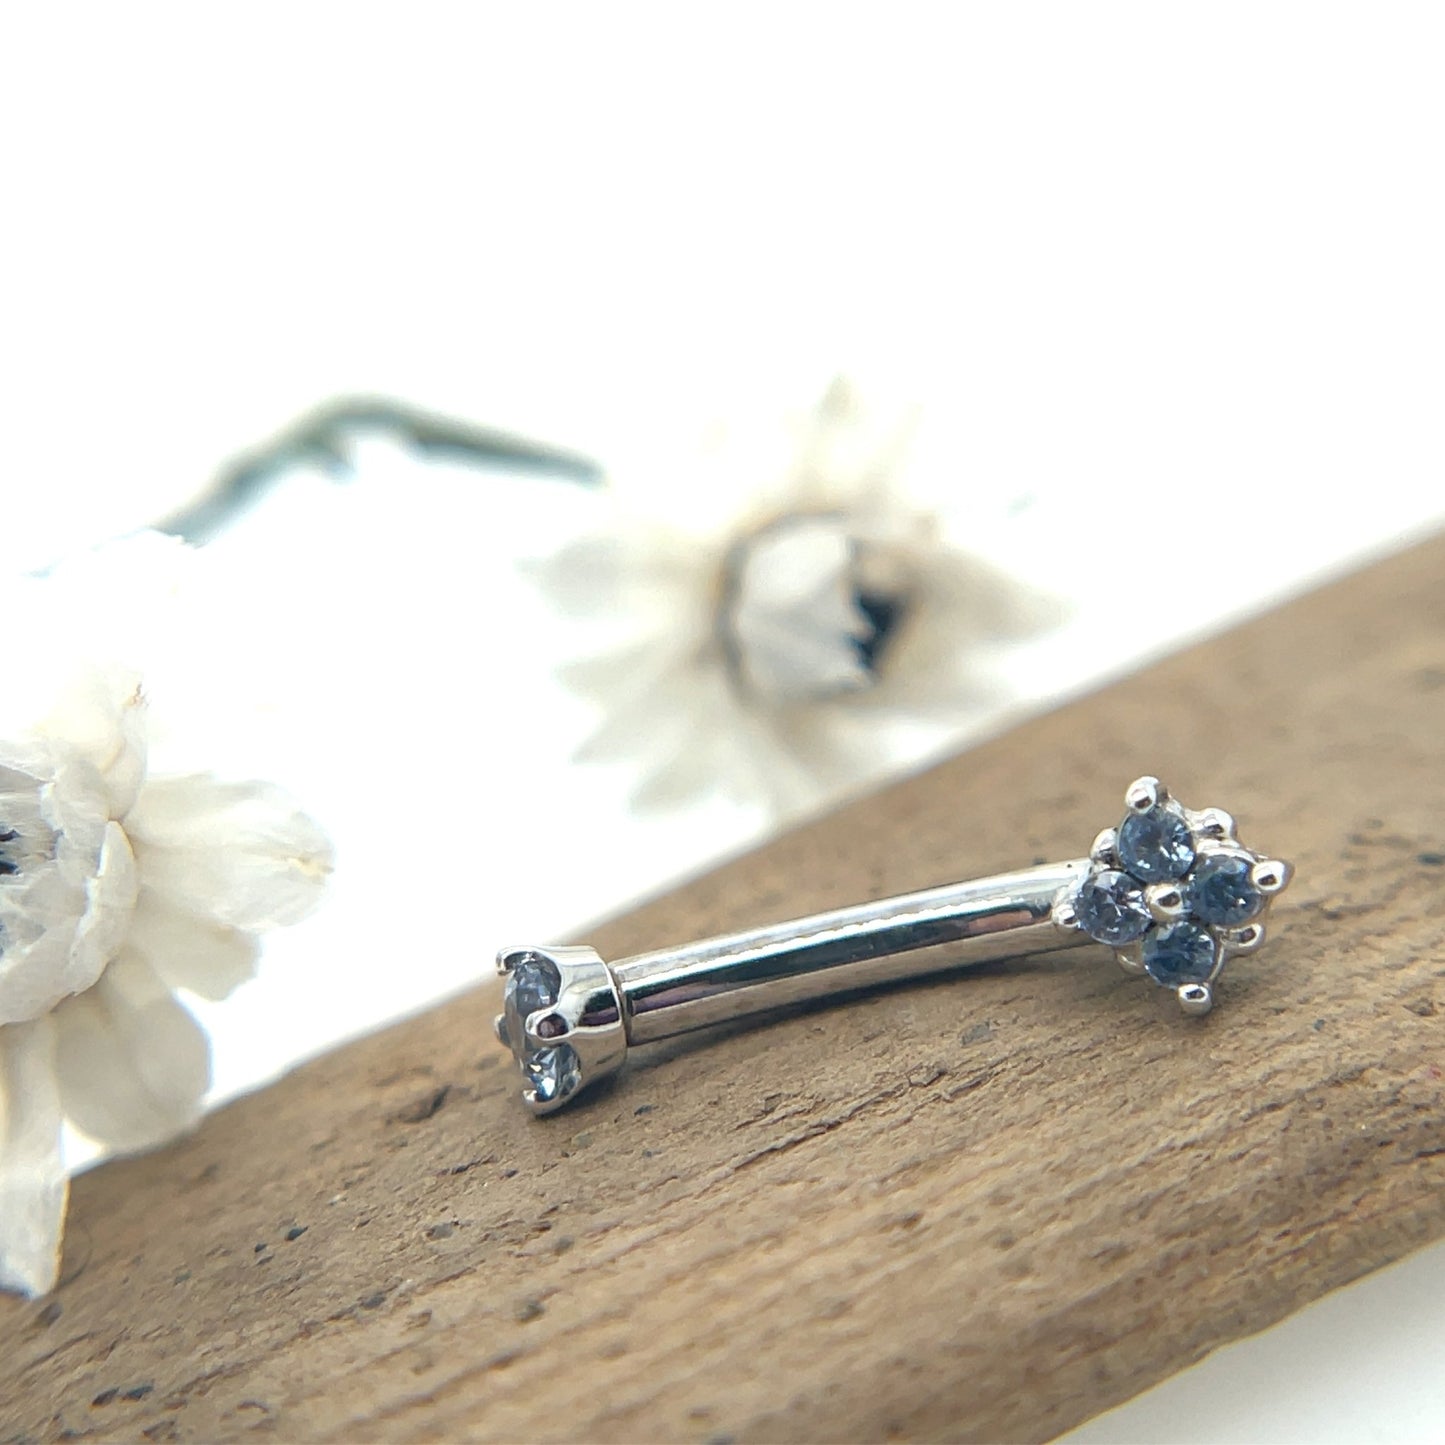 3.5mm Reema Navel Curve - Agave in Bloom